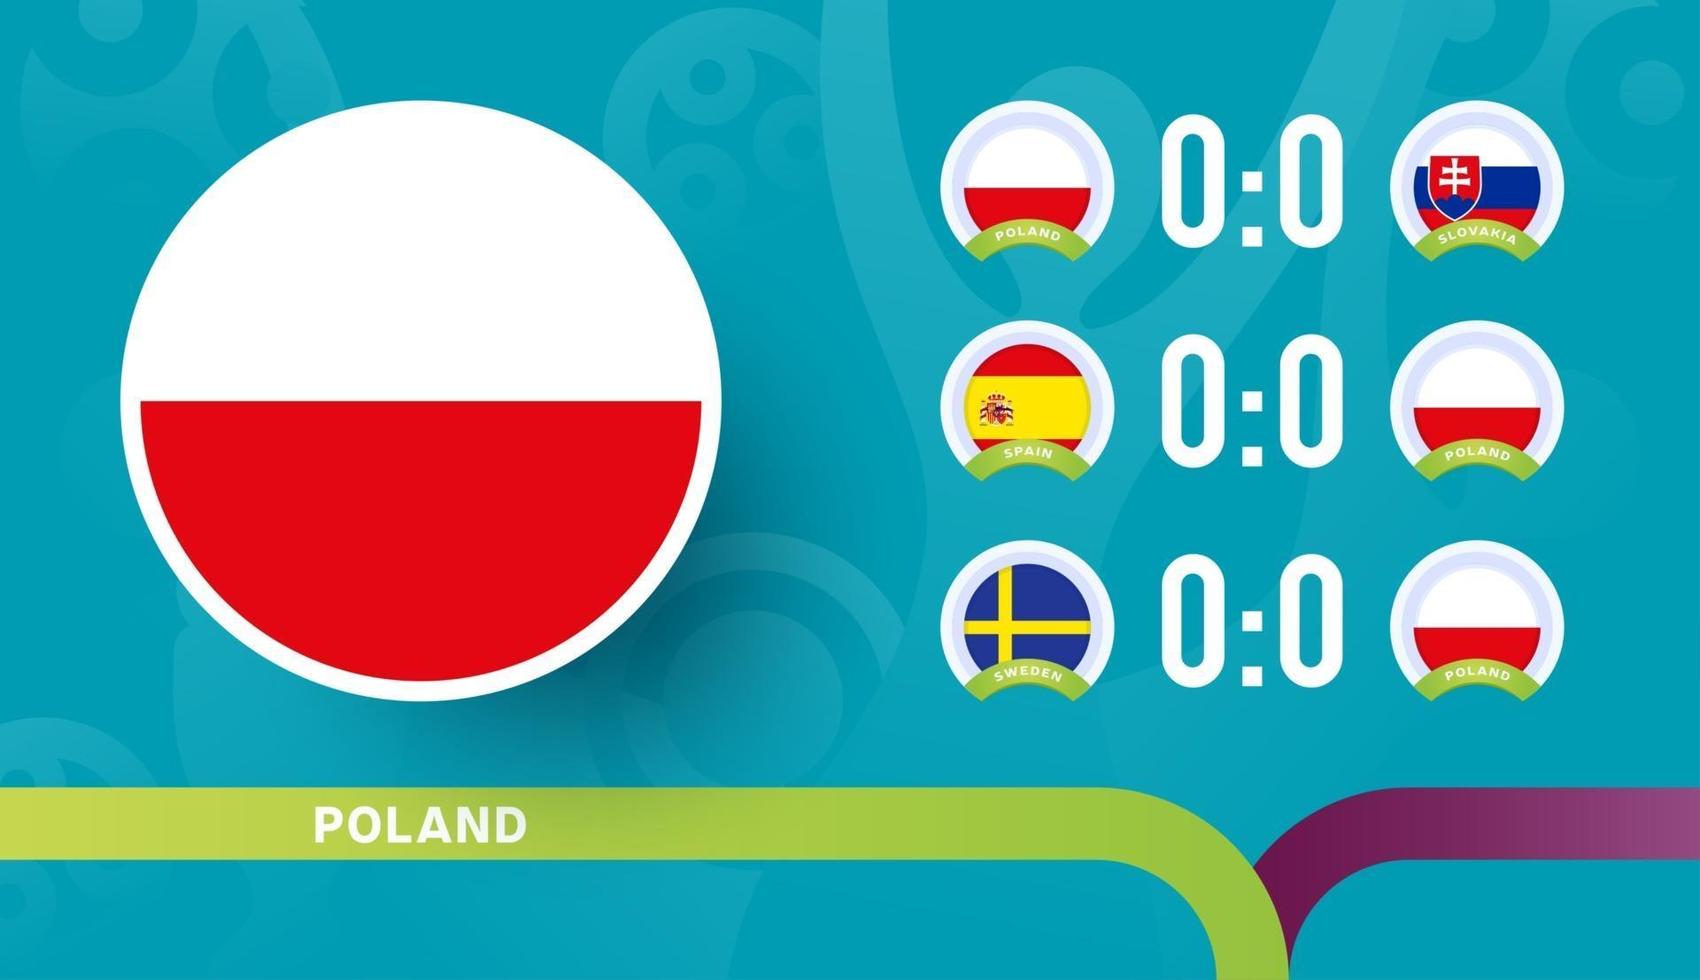 poland national team Schedule matches in the final stage at the 2020 Football Championship. Vector illustration of football 2020 matches